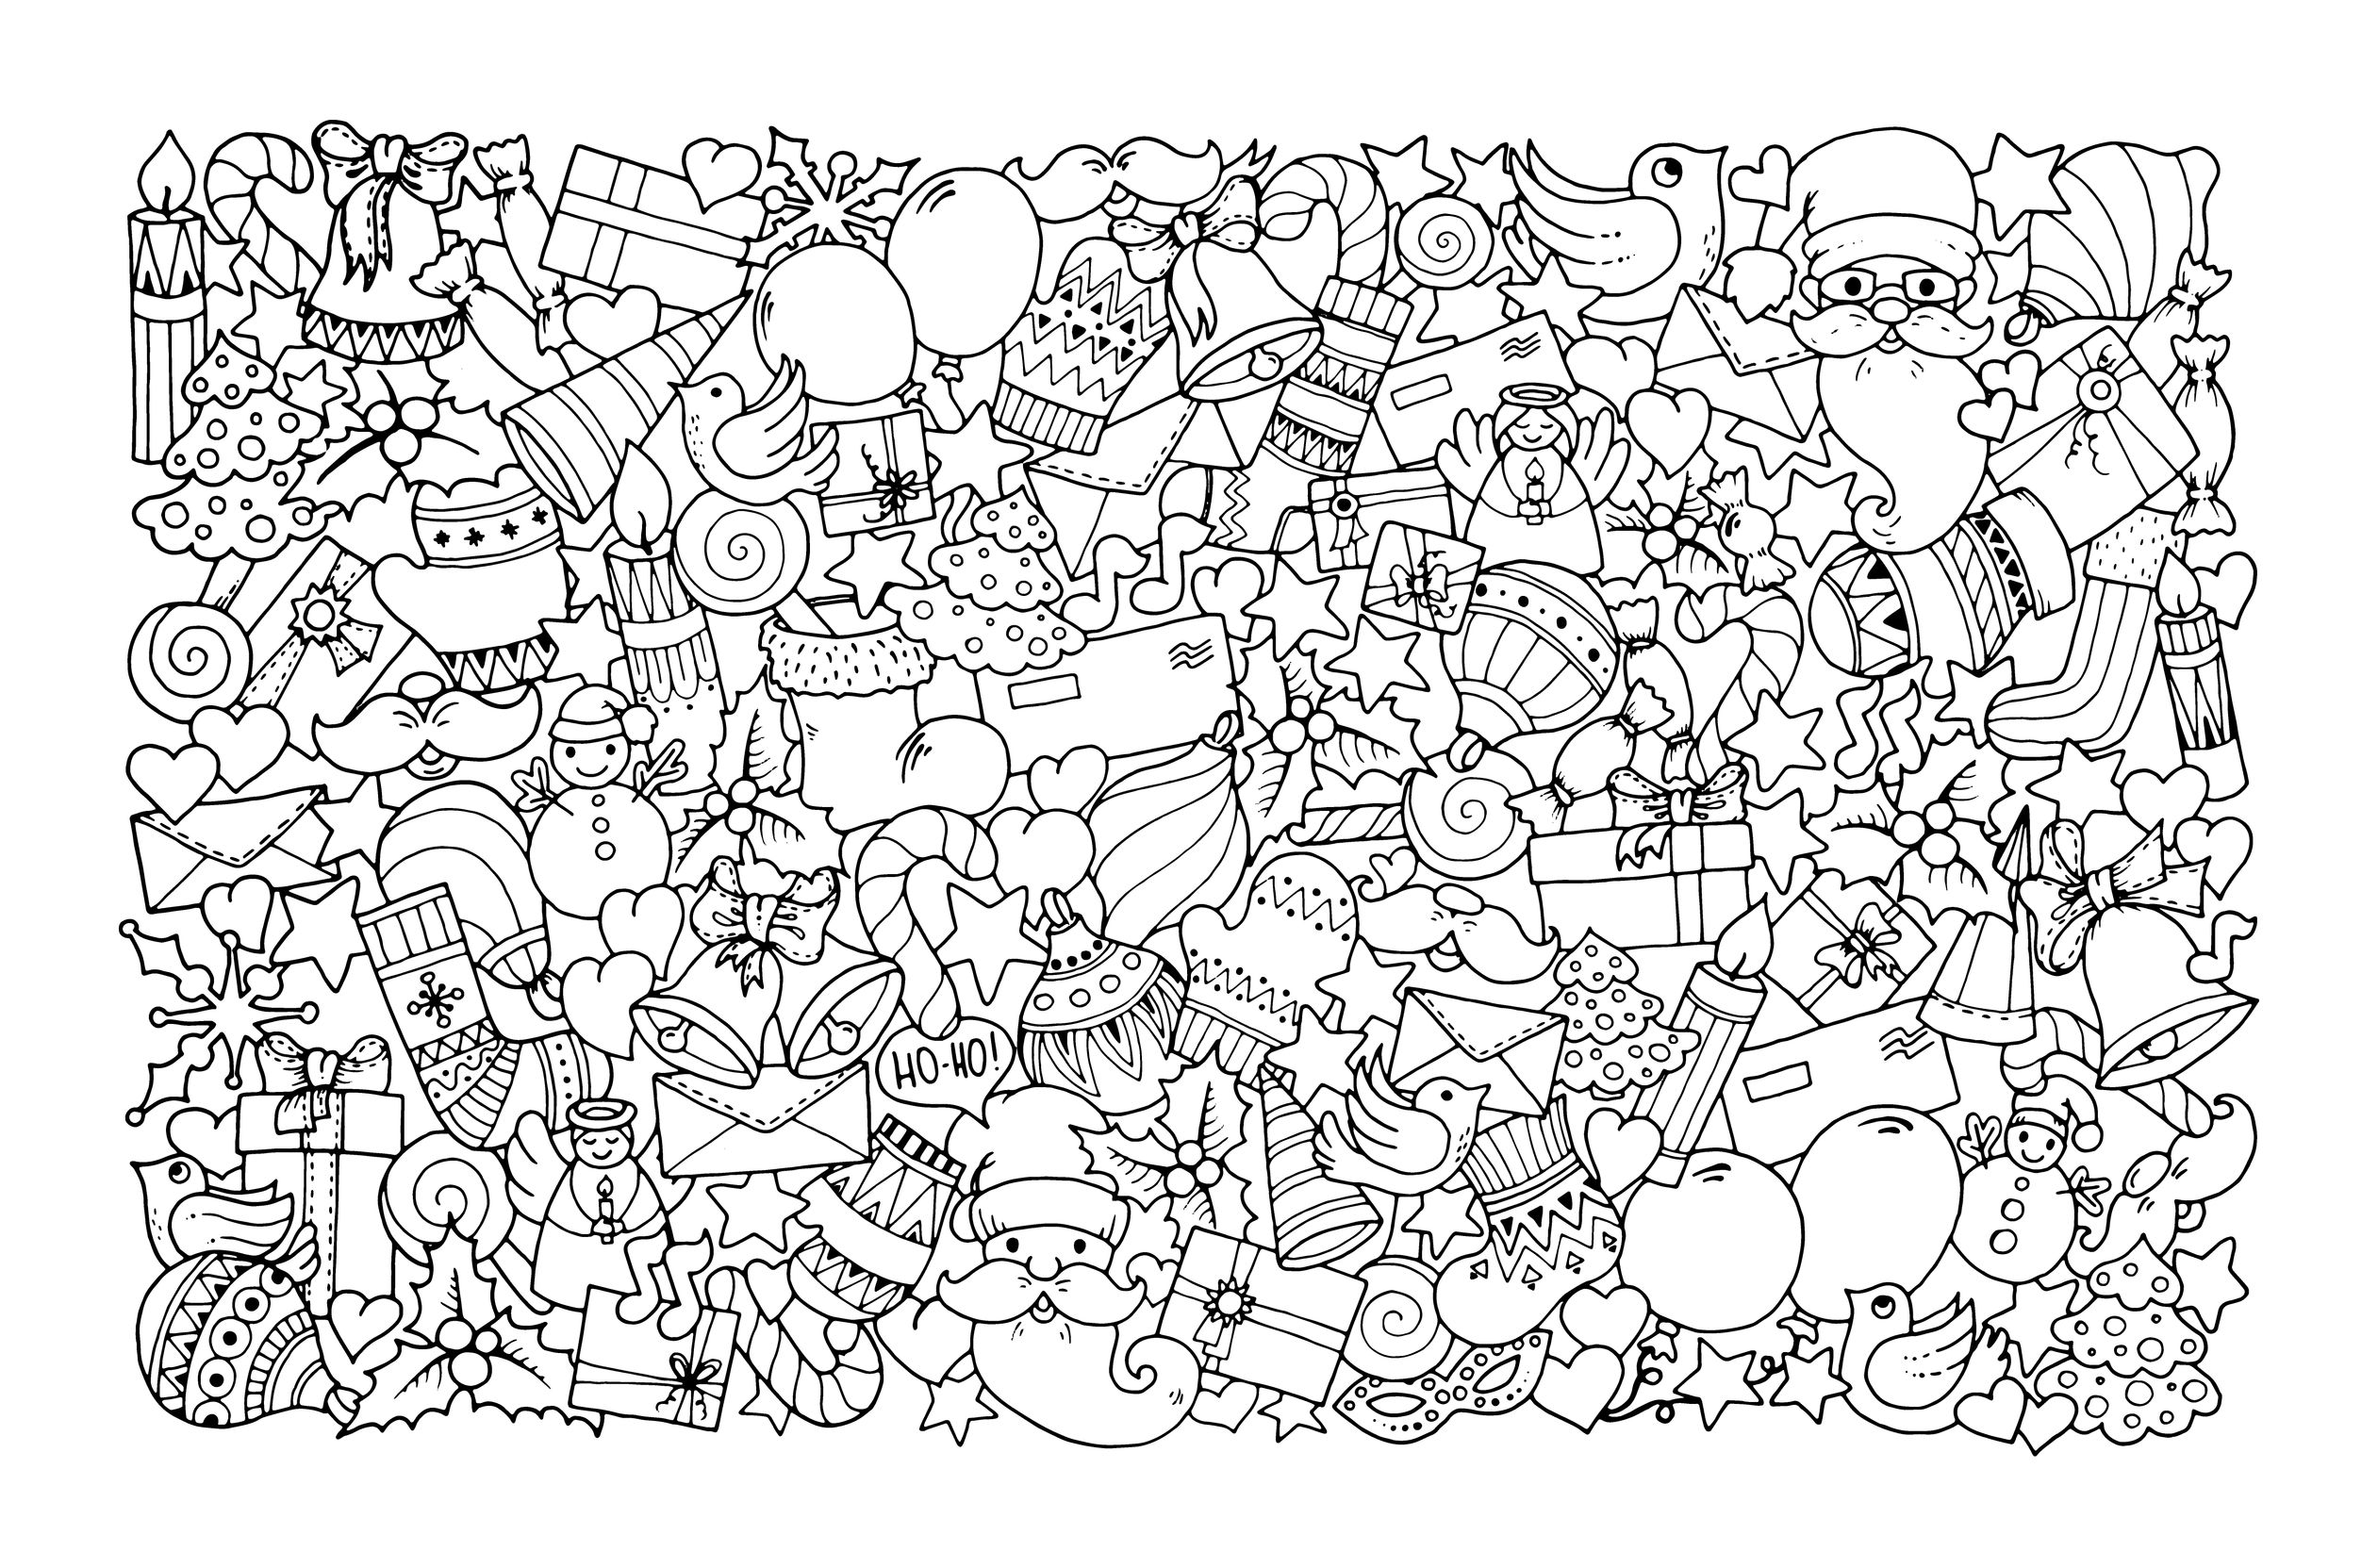 Christmas Coloring Pages For Adults Best Coloring Pages Coloring Wallpapers Download Free Images Wallpaper [coloring365.blogspot.com]